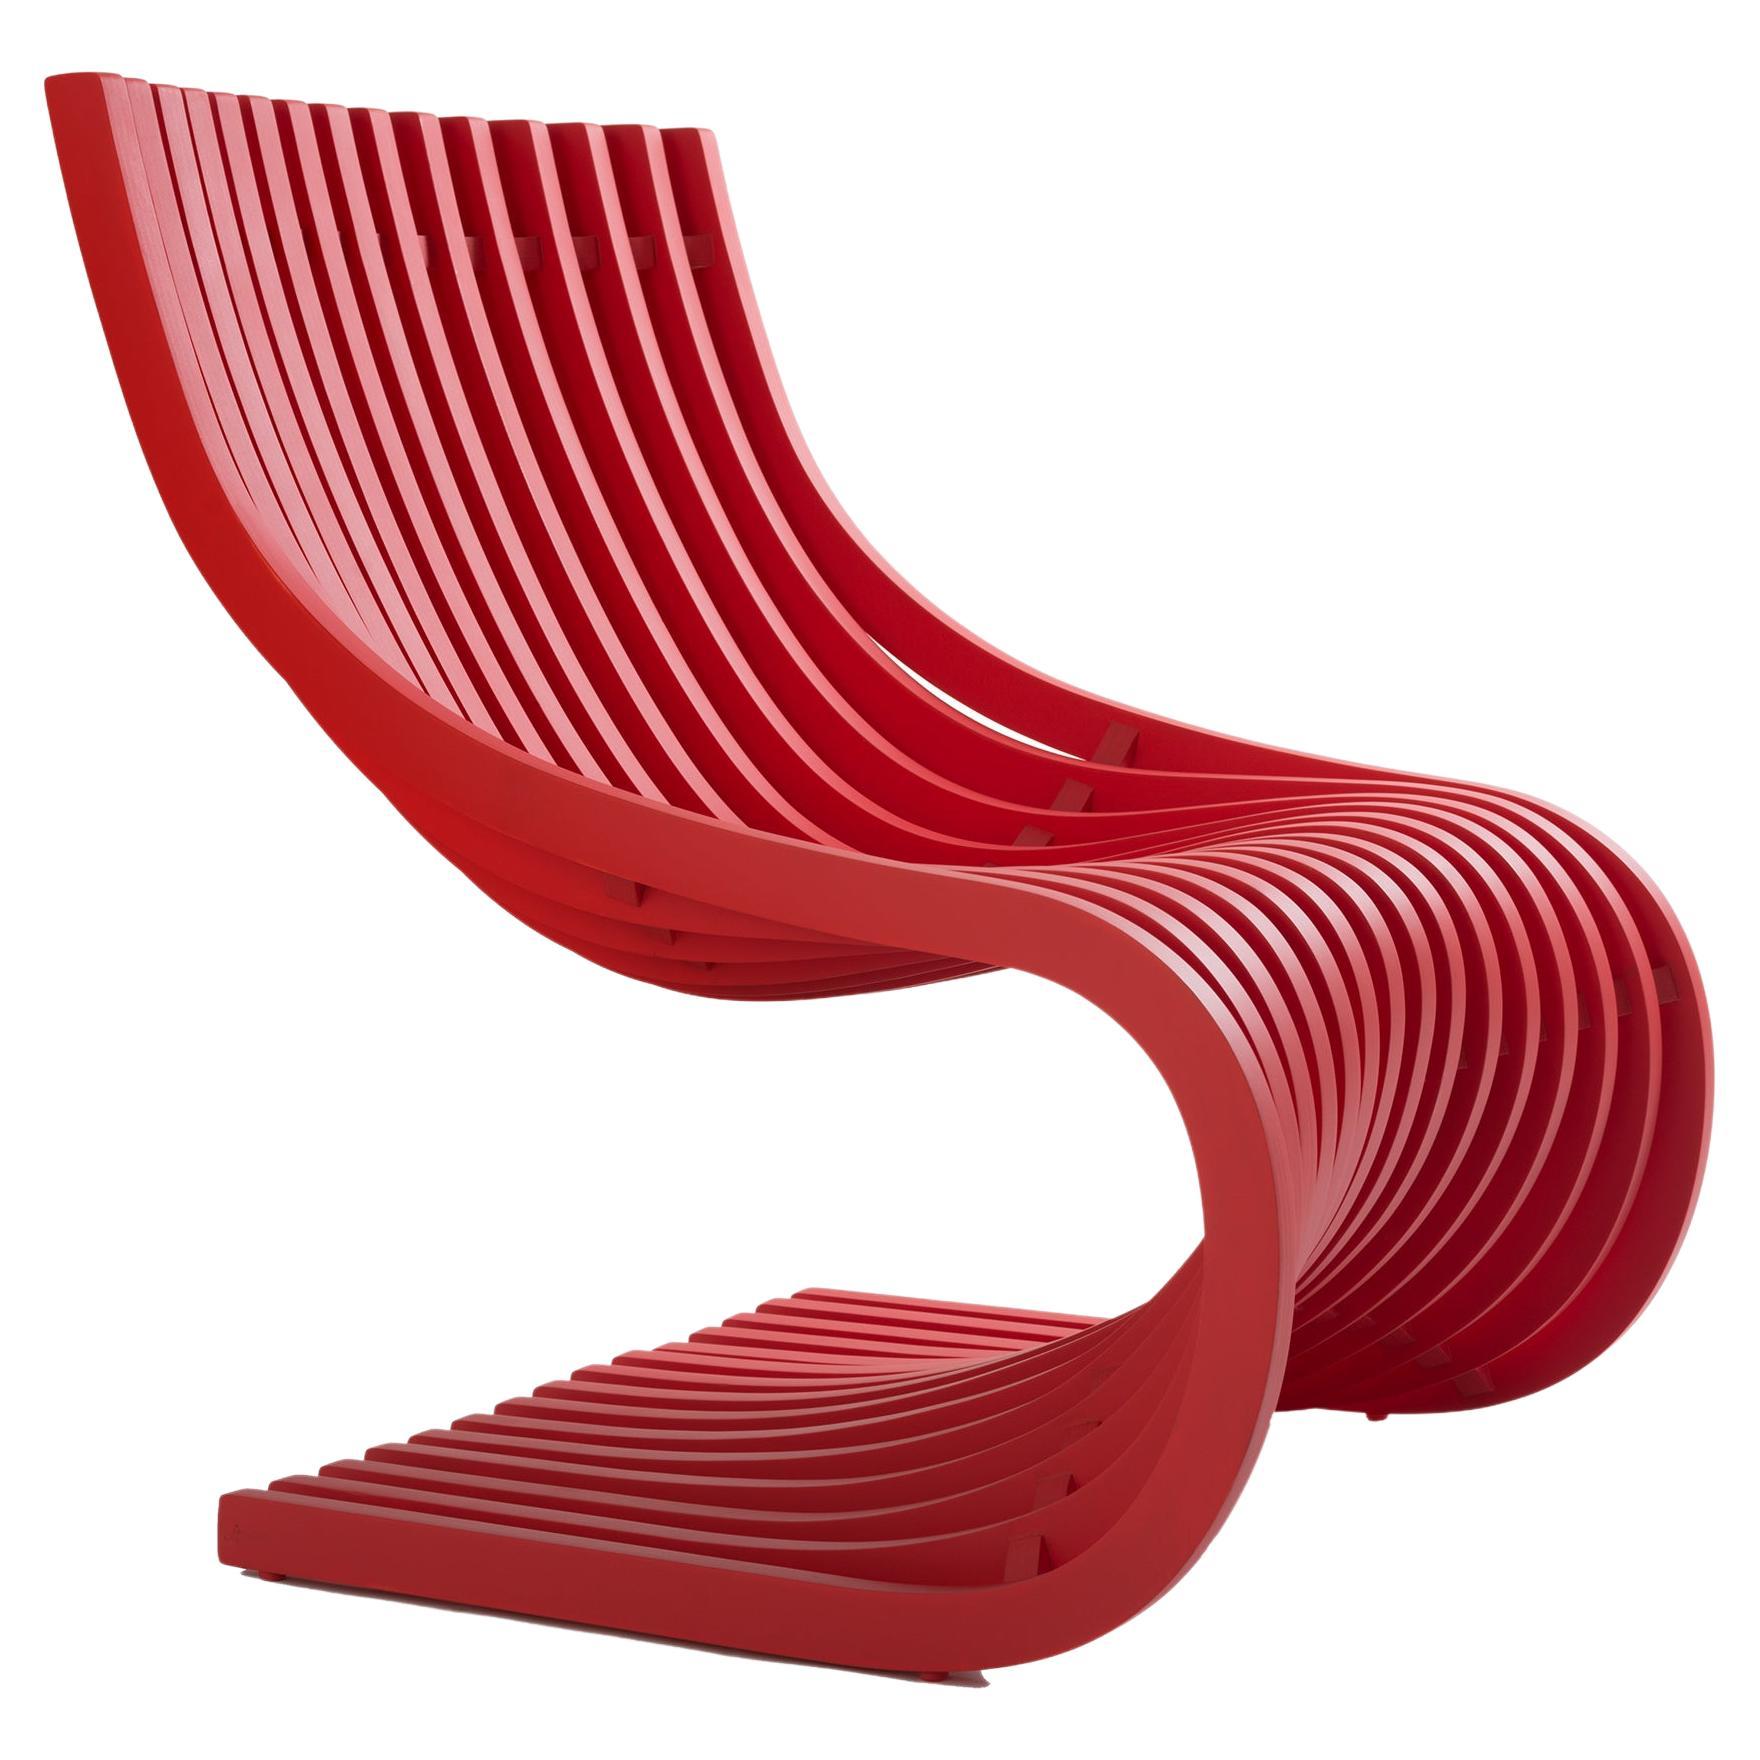 Double S Chair by Piegatto, a Sculptural Contemporary Chair For Sale